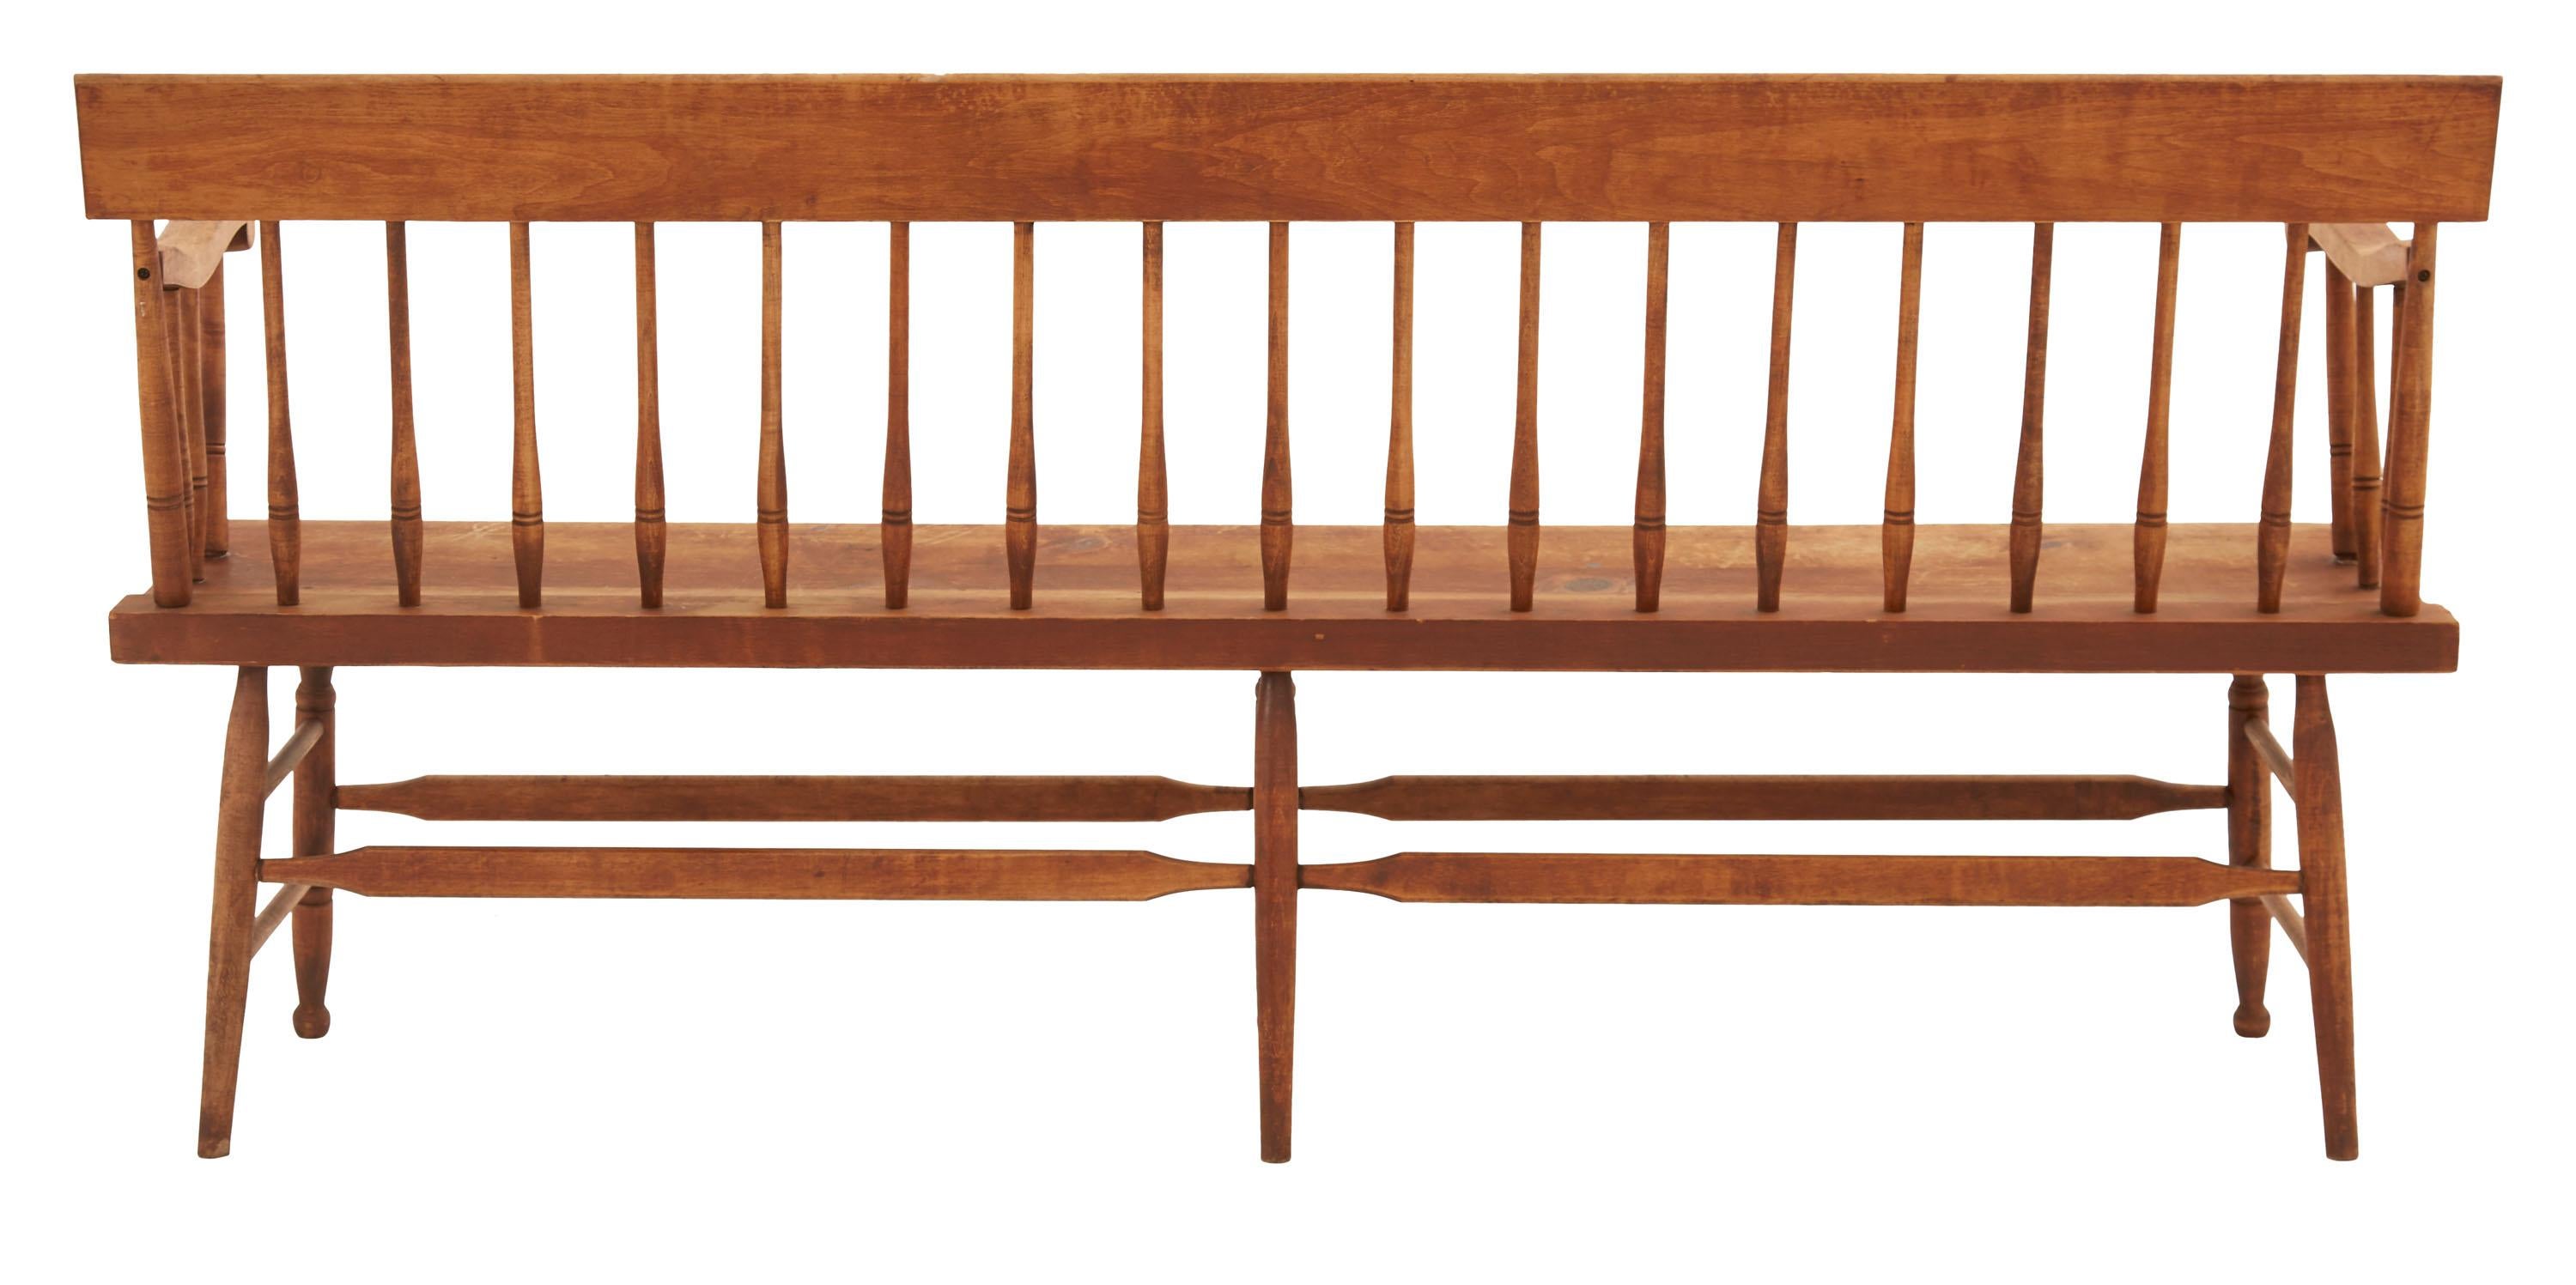 American Early 20th Century Wooden Spindle Bench